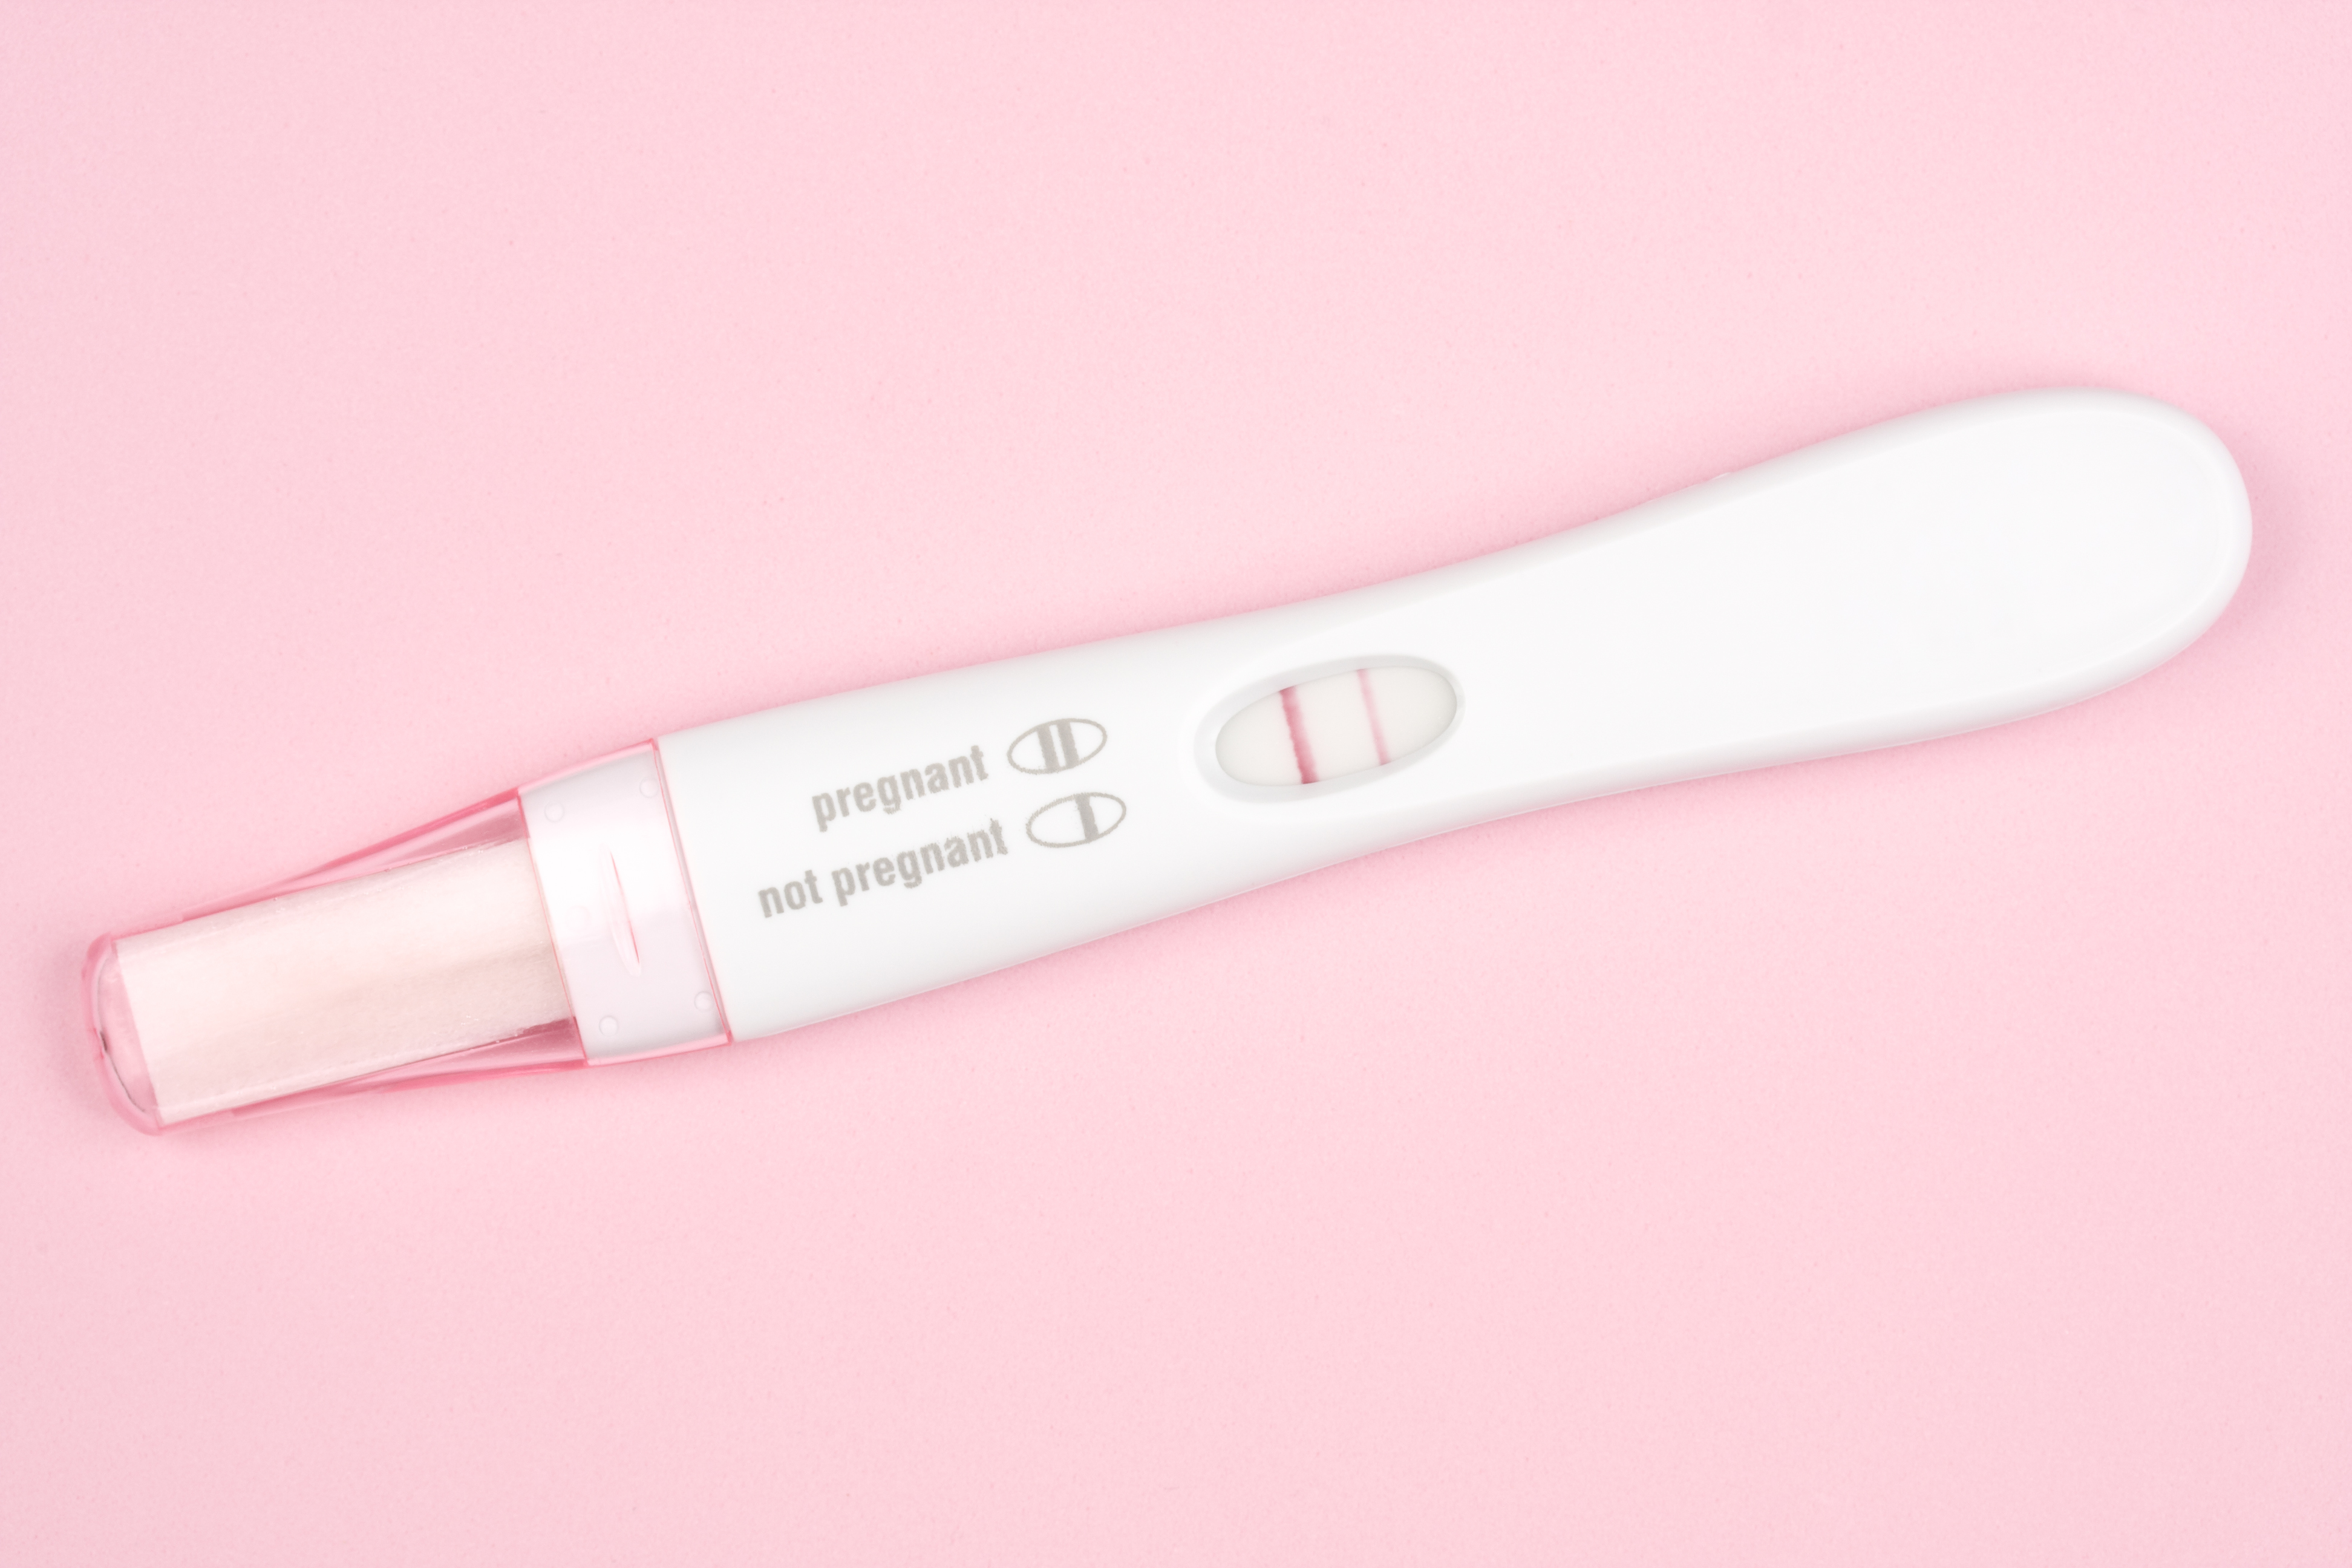 Positive pregnancy test on pink background (cillay—Getty Images/iStockphoto)